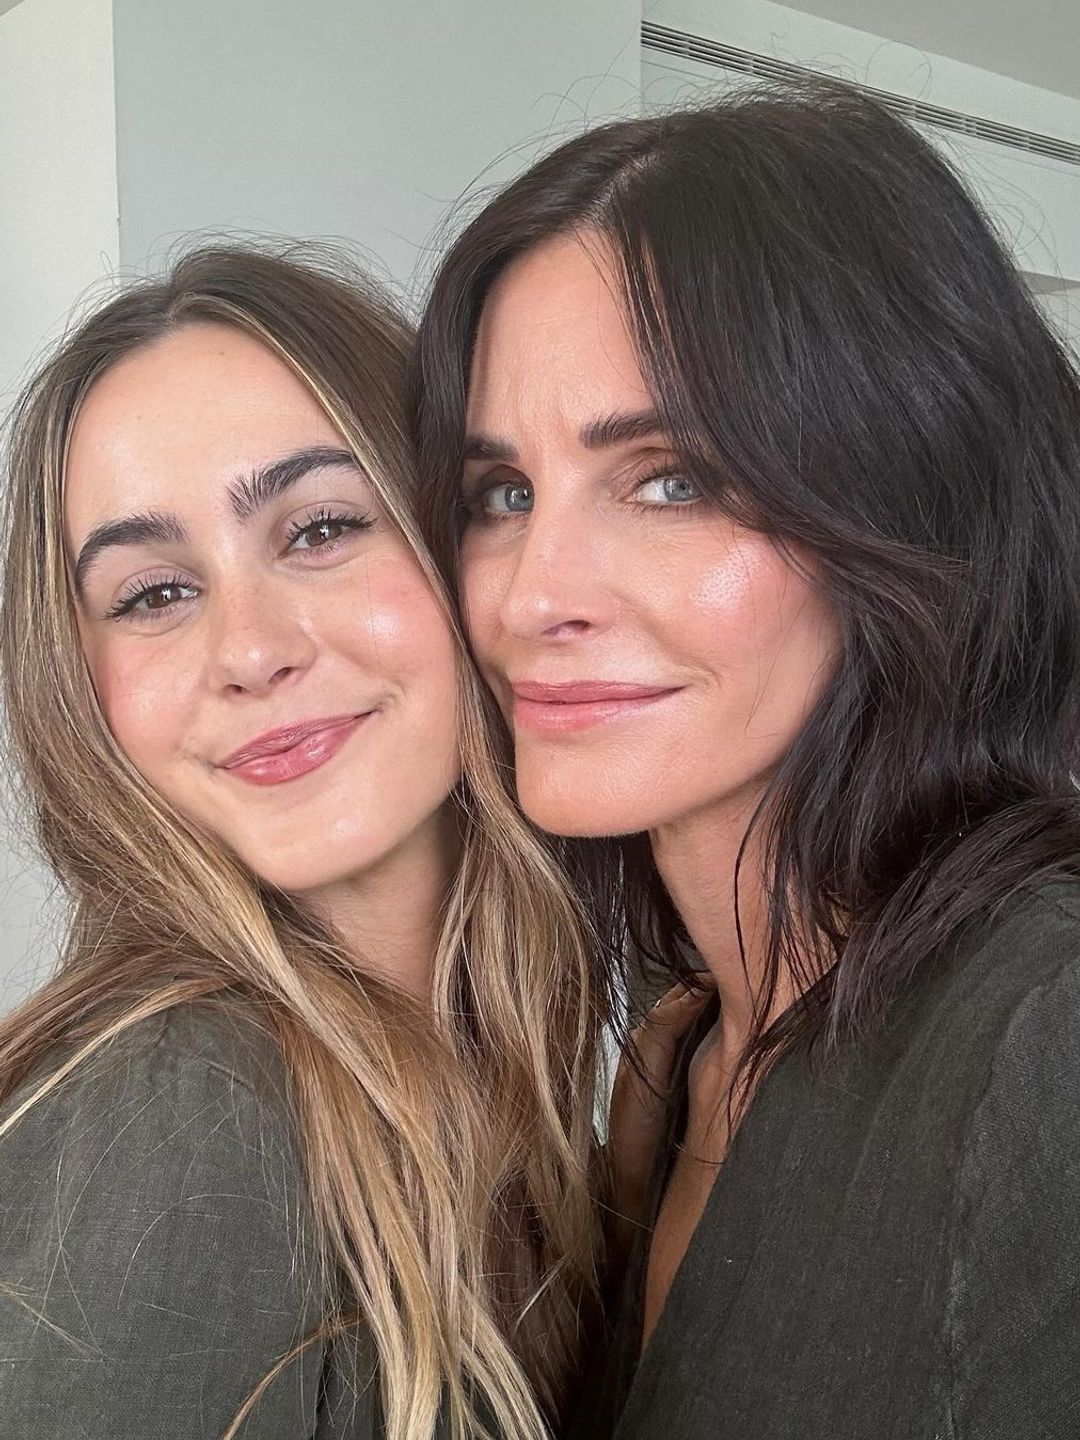 Courteney Cox and her daughter Coco Arquette in a selfie shared on Mother's Day